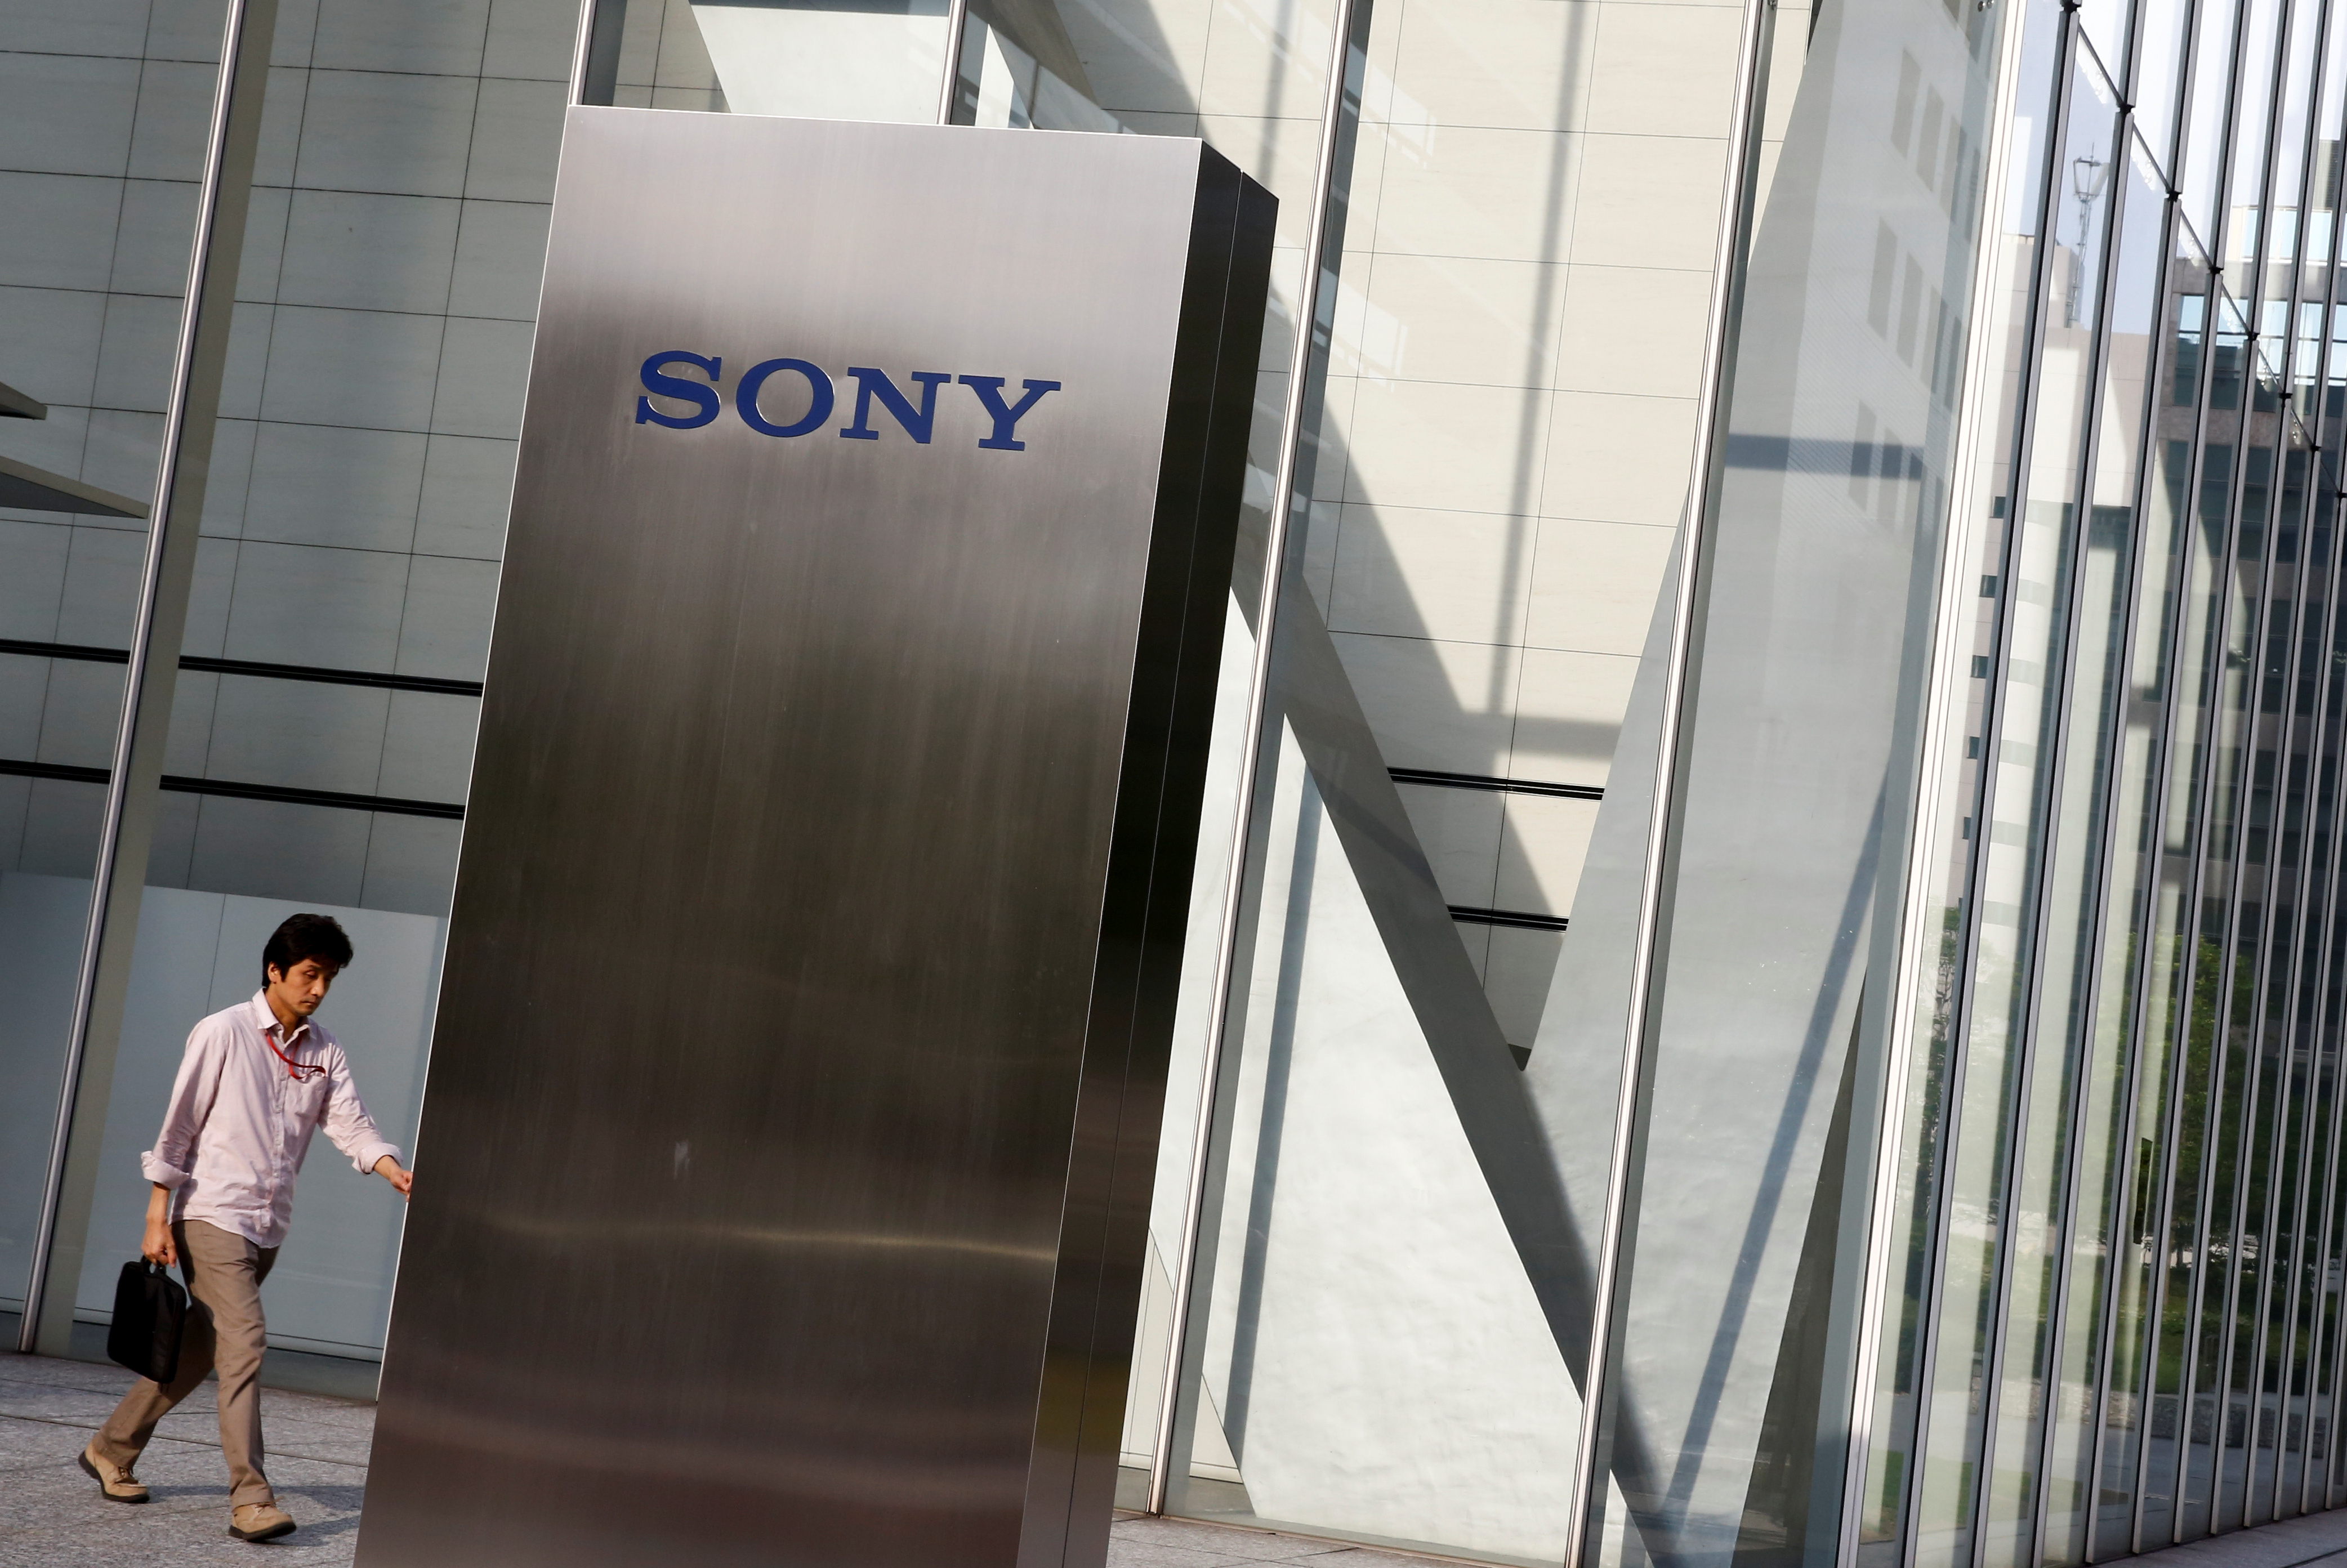 A man walks past the Sony brand logo outside the headquarters of Sony Corp in Tokyo